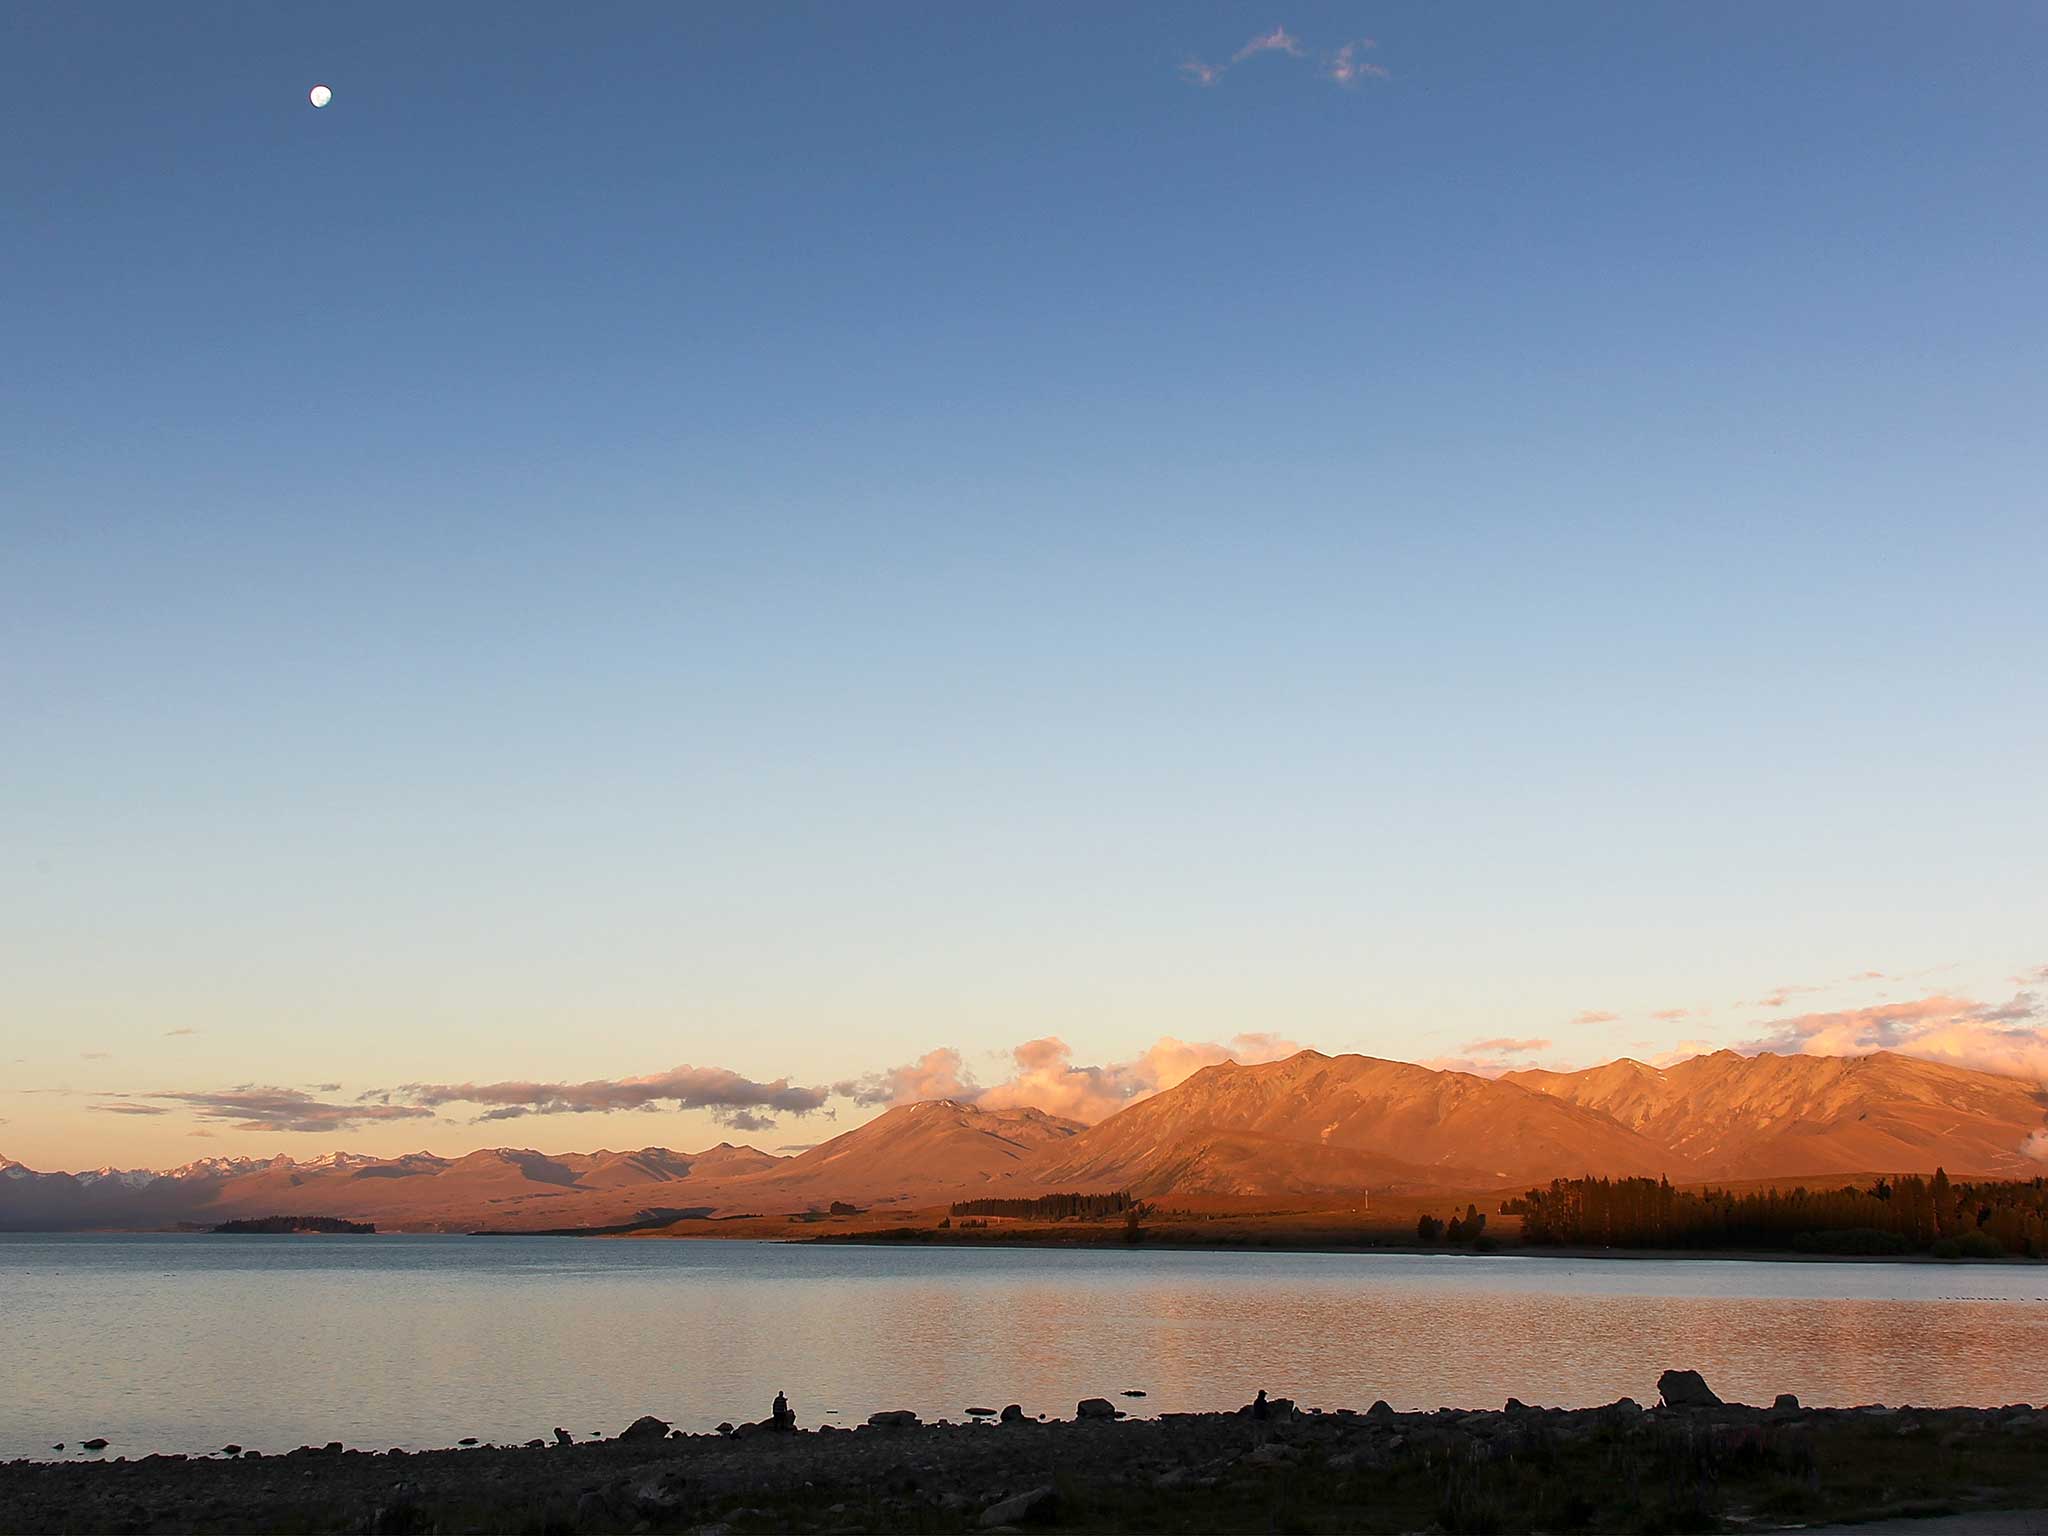 They had been kayaking with nine other friends on Lake Tekapo